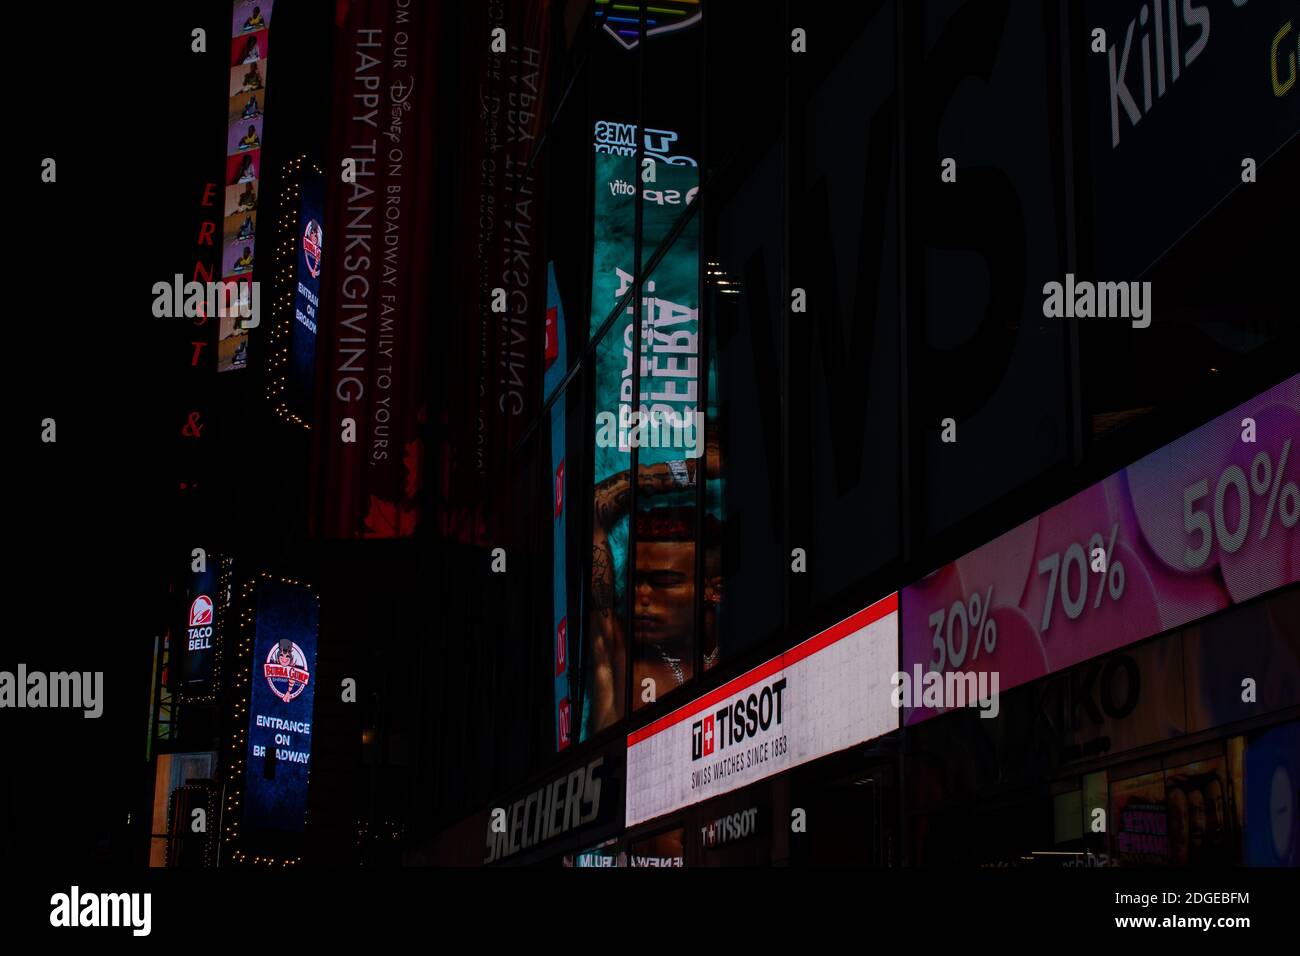 Ad Reflecting on Windows in TimeSquare NYC Stock Photo